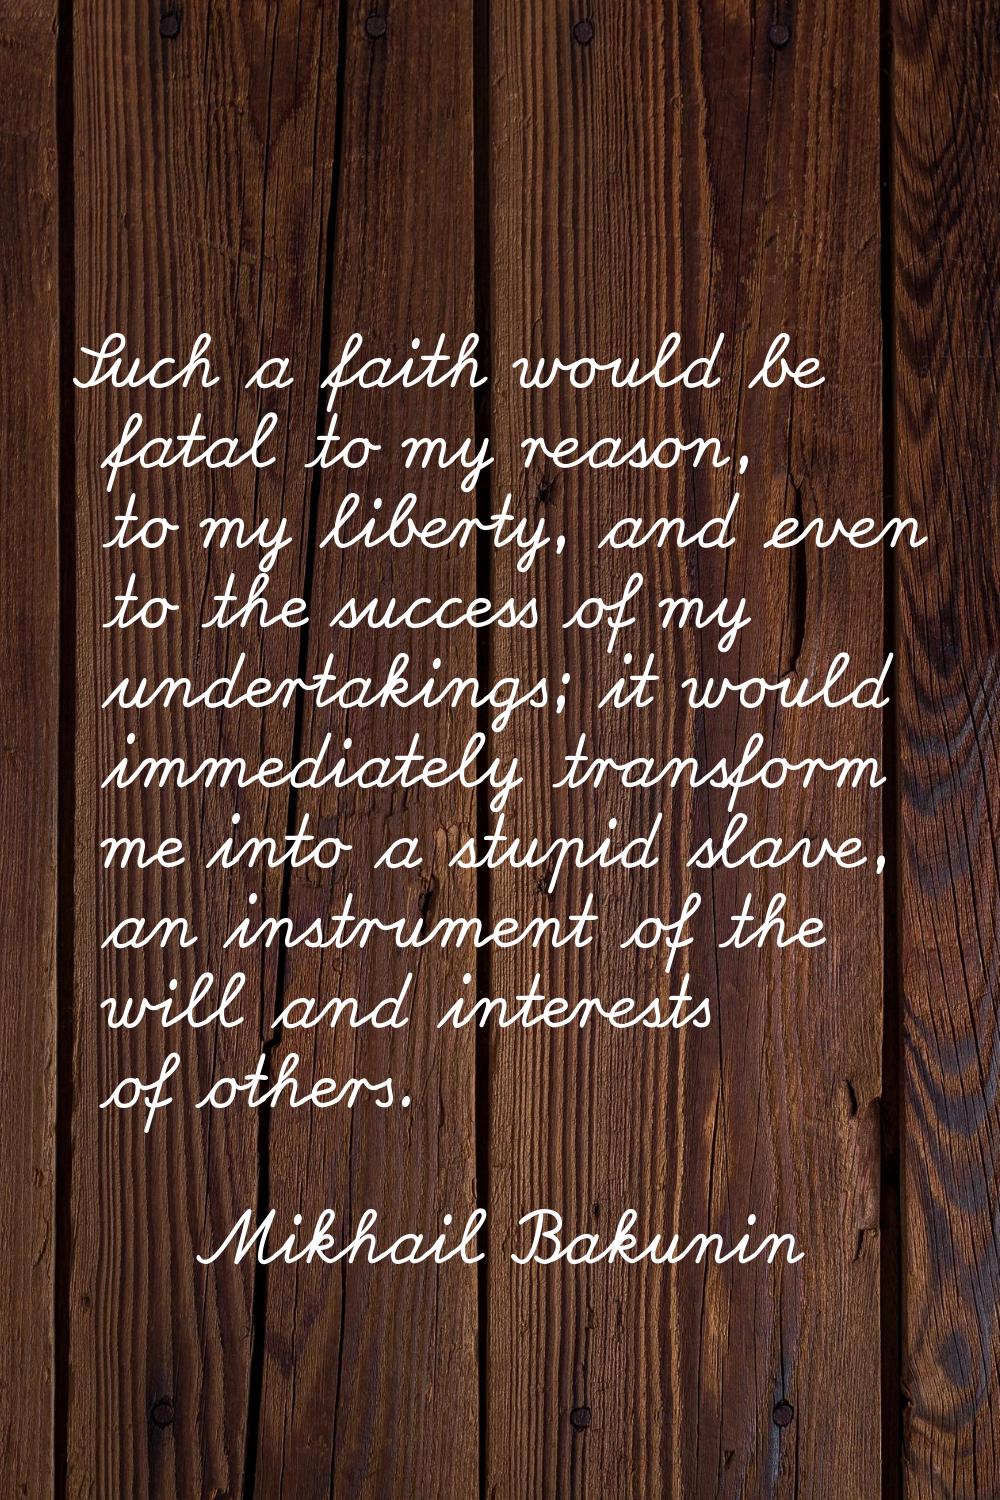 Such a faith would be fatal to my reason, to my liberty, and even to the success of my undertakings